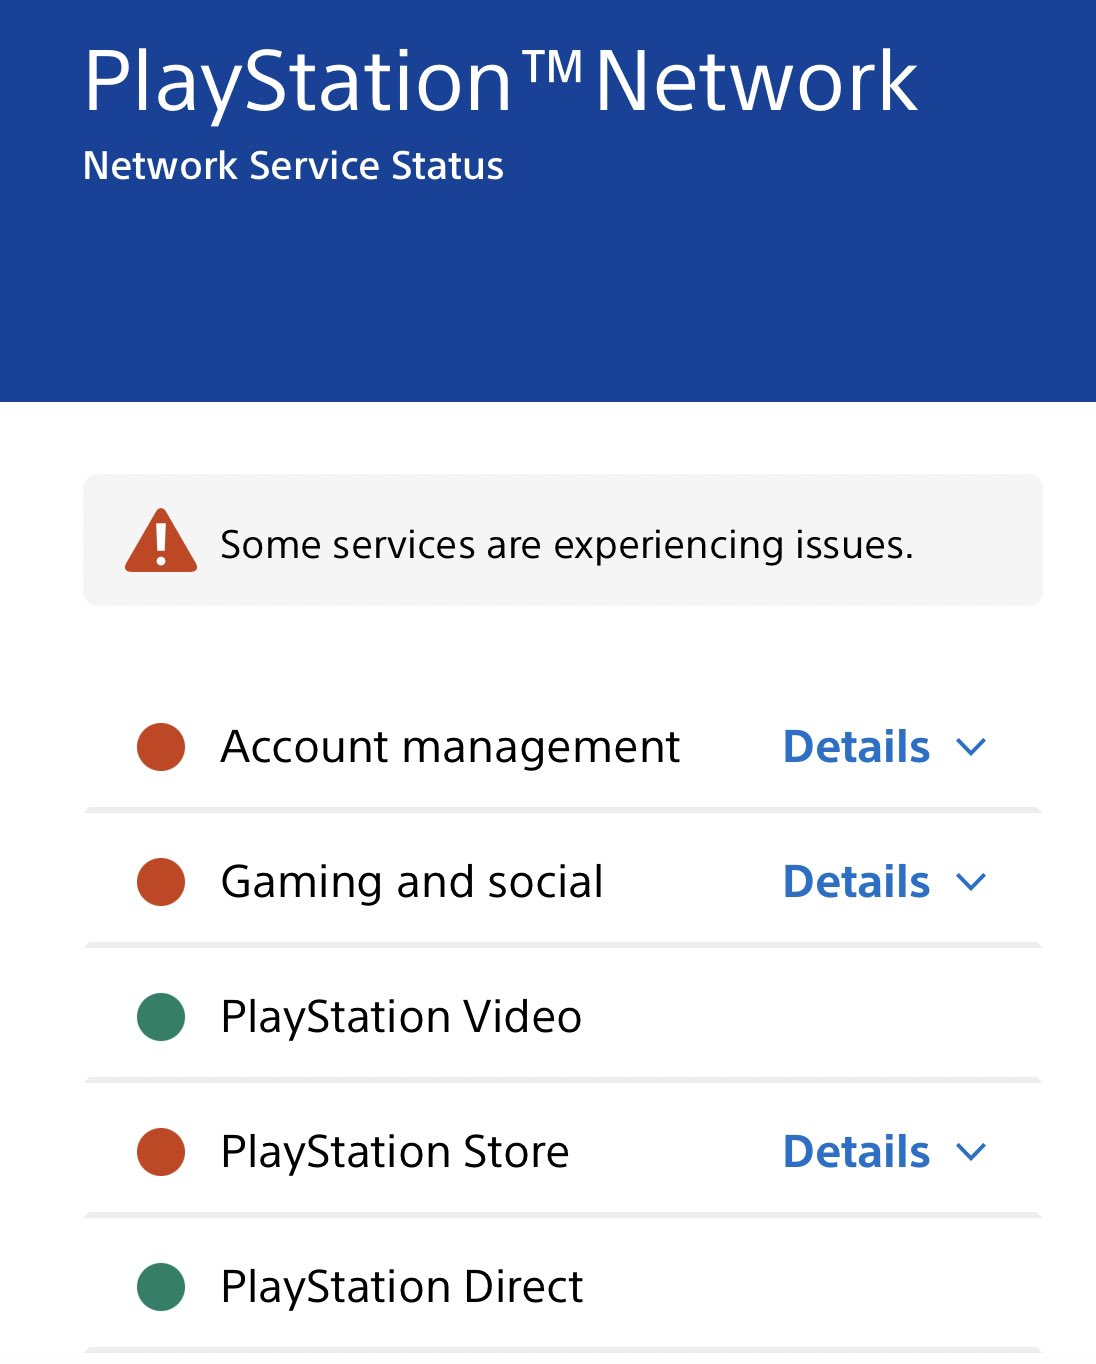 Legends News on Twitter: "PlayStation is currently down: If you can't play Legends PS right now - it's not just you ❌ https://t.co/A1DHZGjA4W" / Twitter